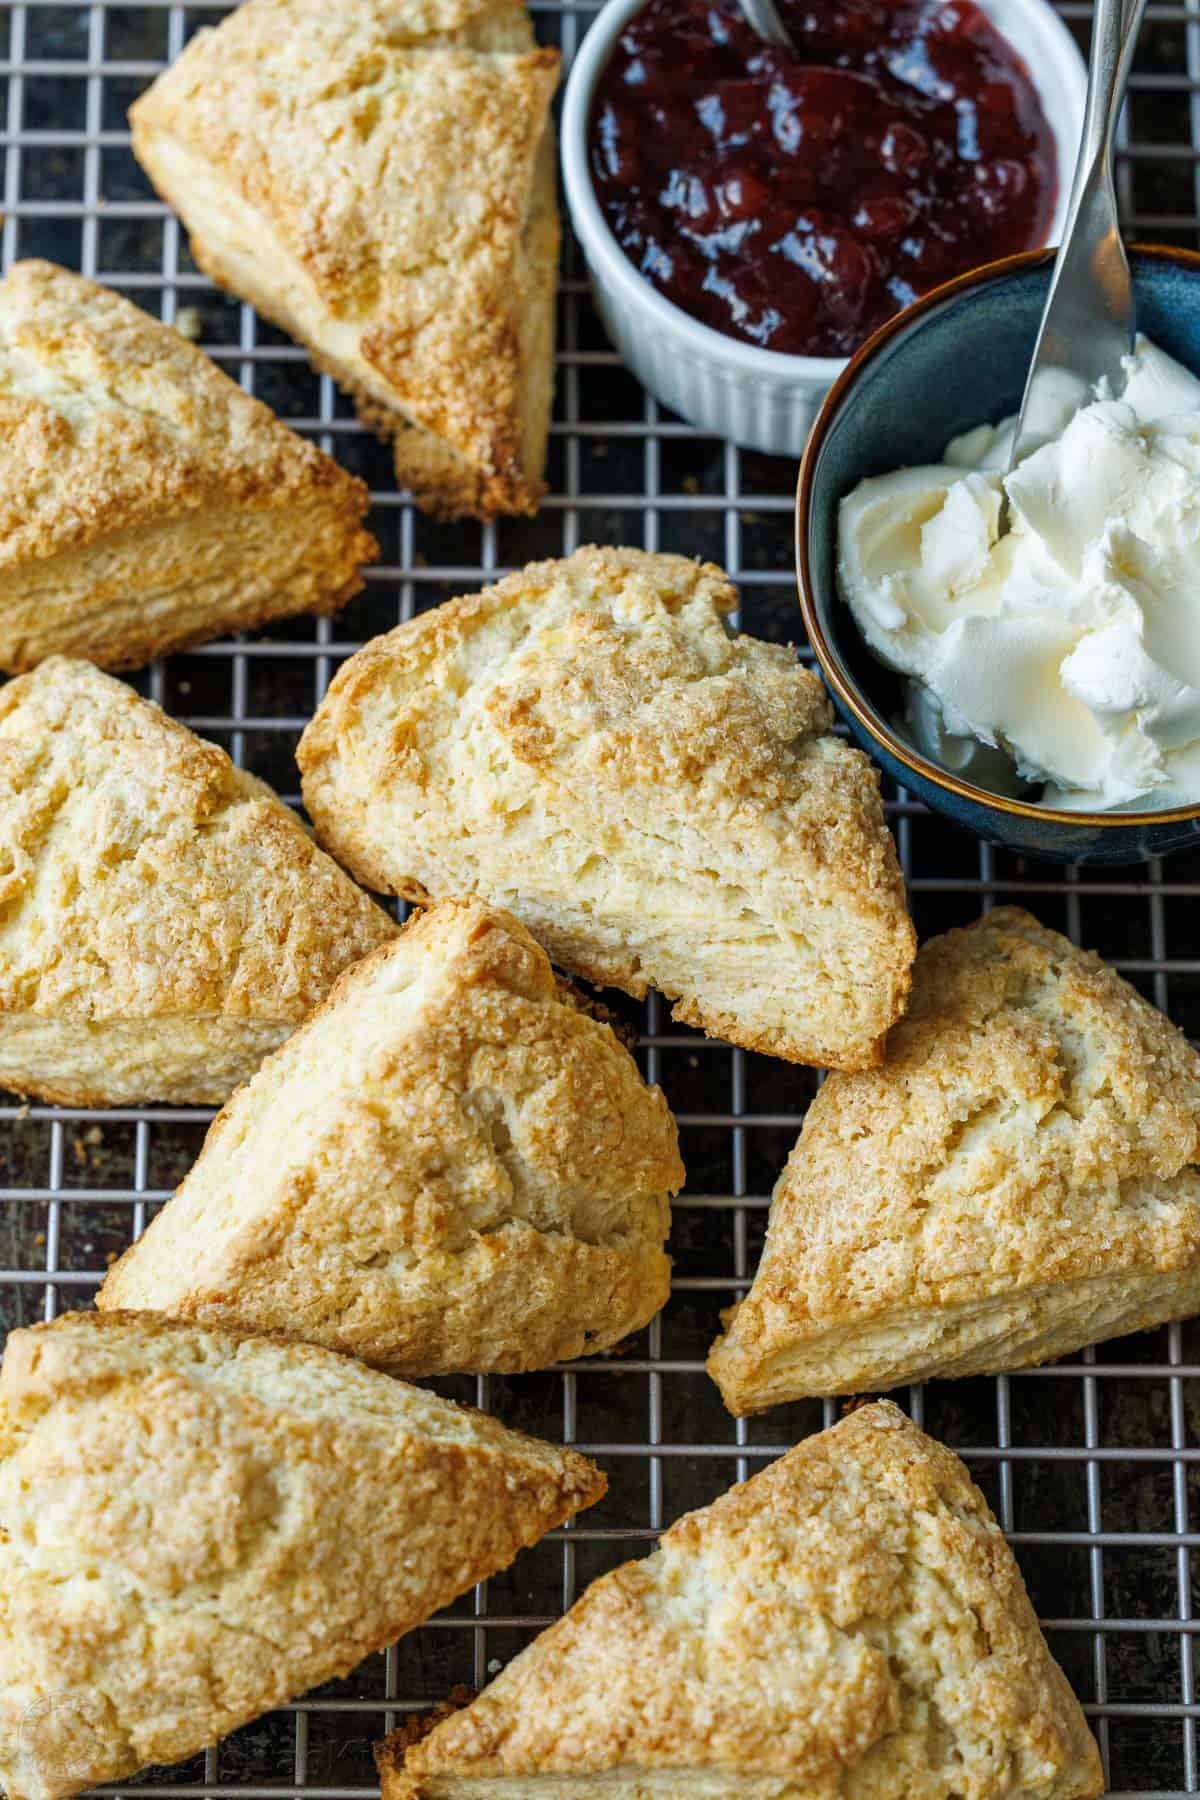 Classic scones on a wire cooling rack with clotted cream and jam in ramekin dishes to use as toppings